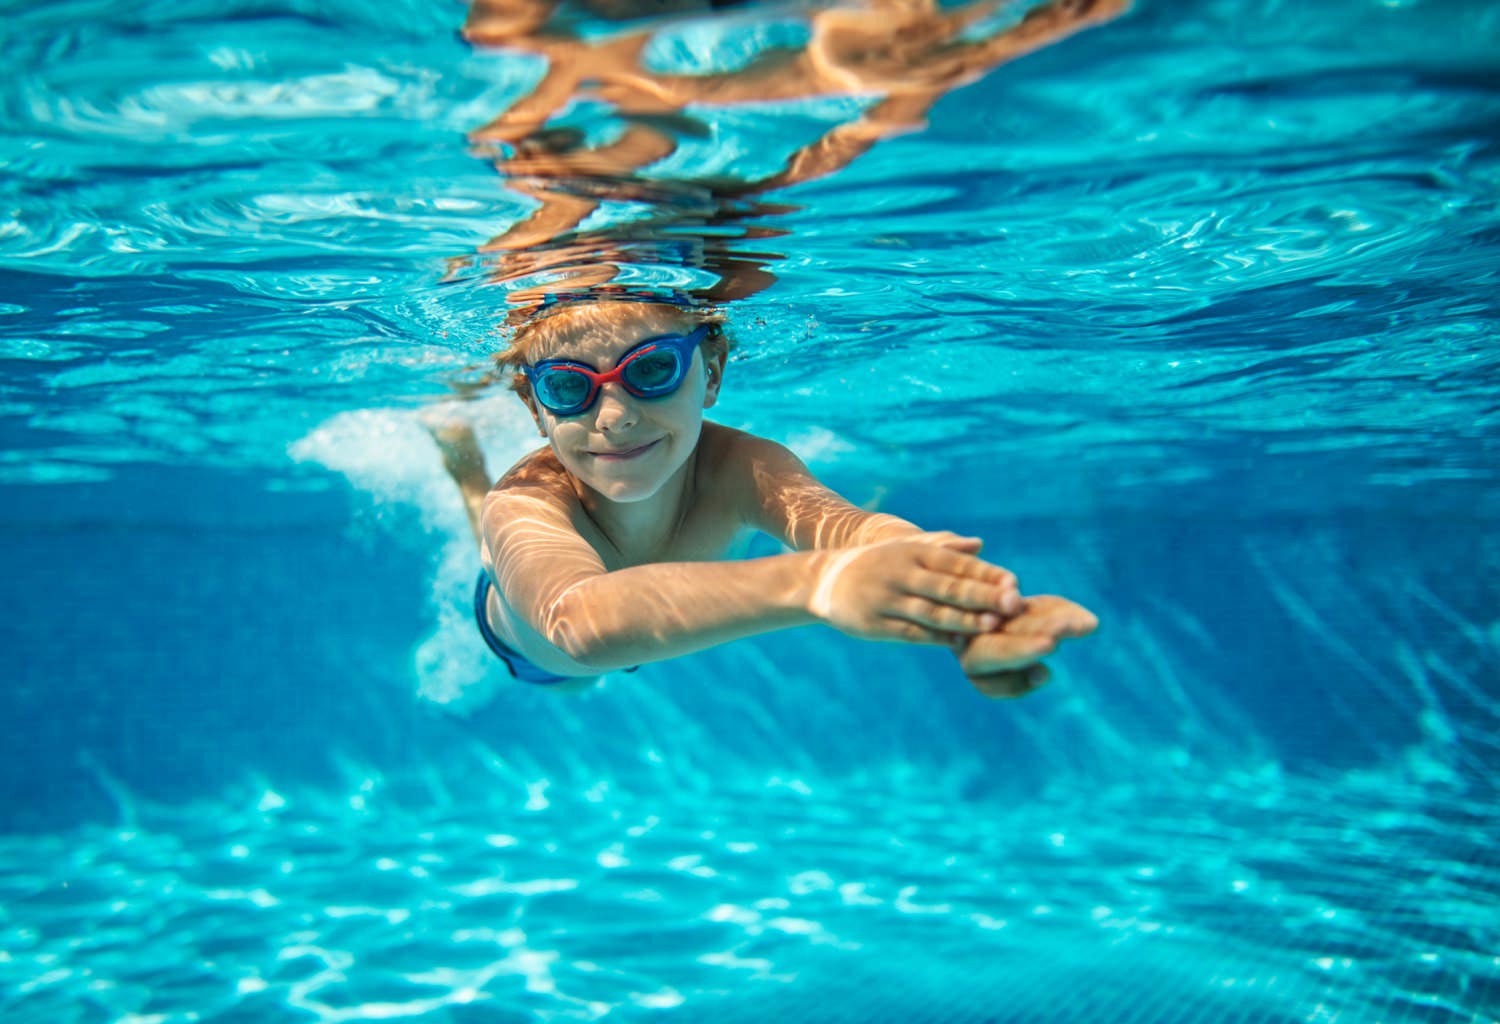 Underwater view of a child wearing goggles swimming in a pool.